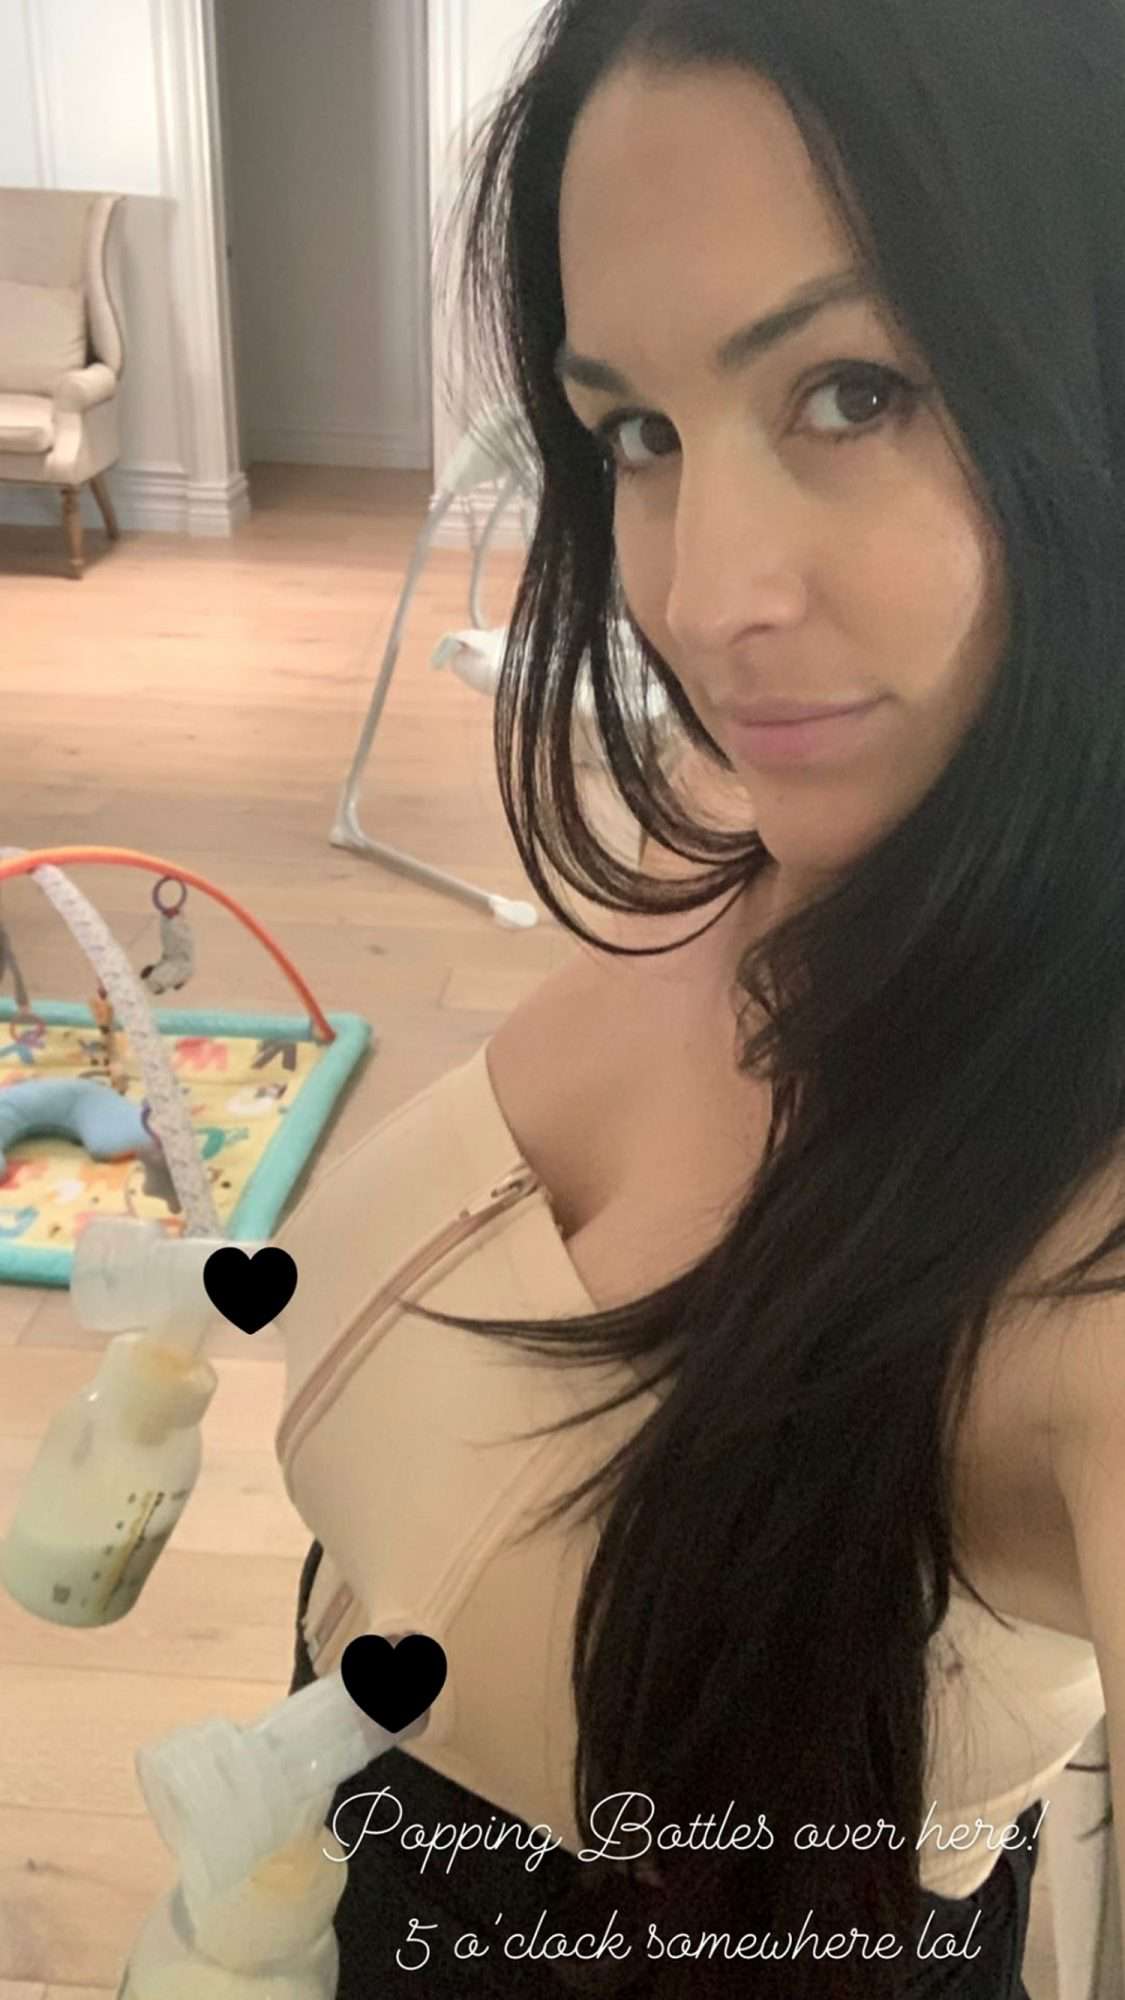 Bella Shares Photo of Herself Pumping Breast Milk: 'Popping Bottles Over Here'